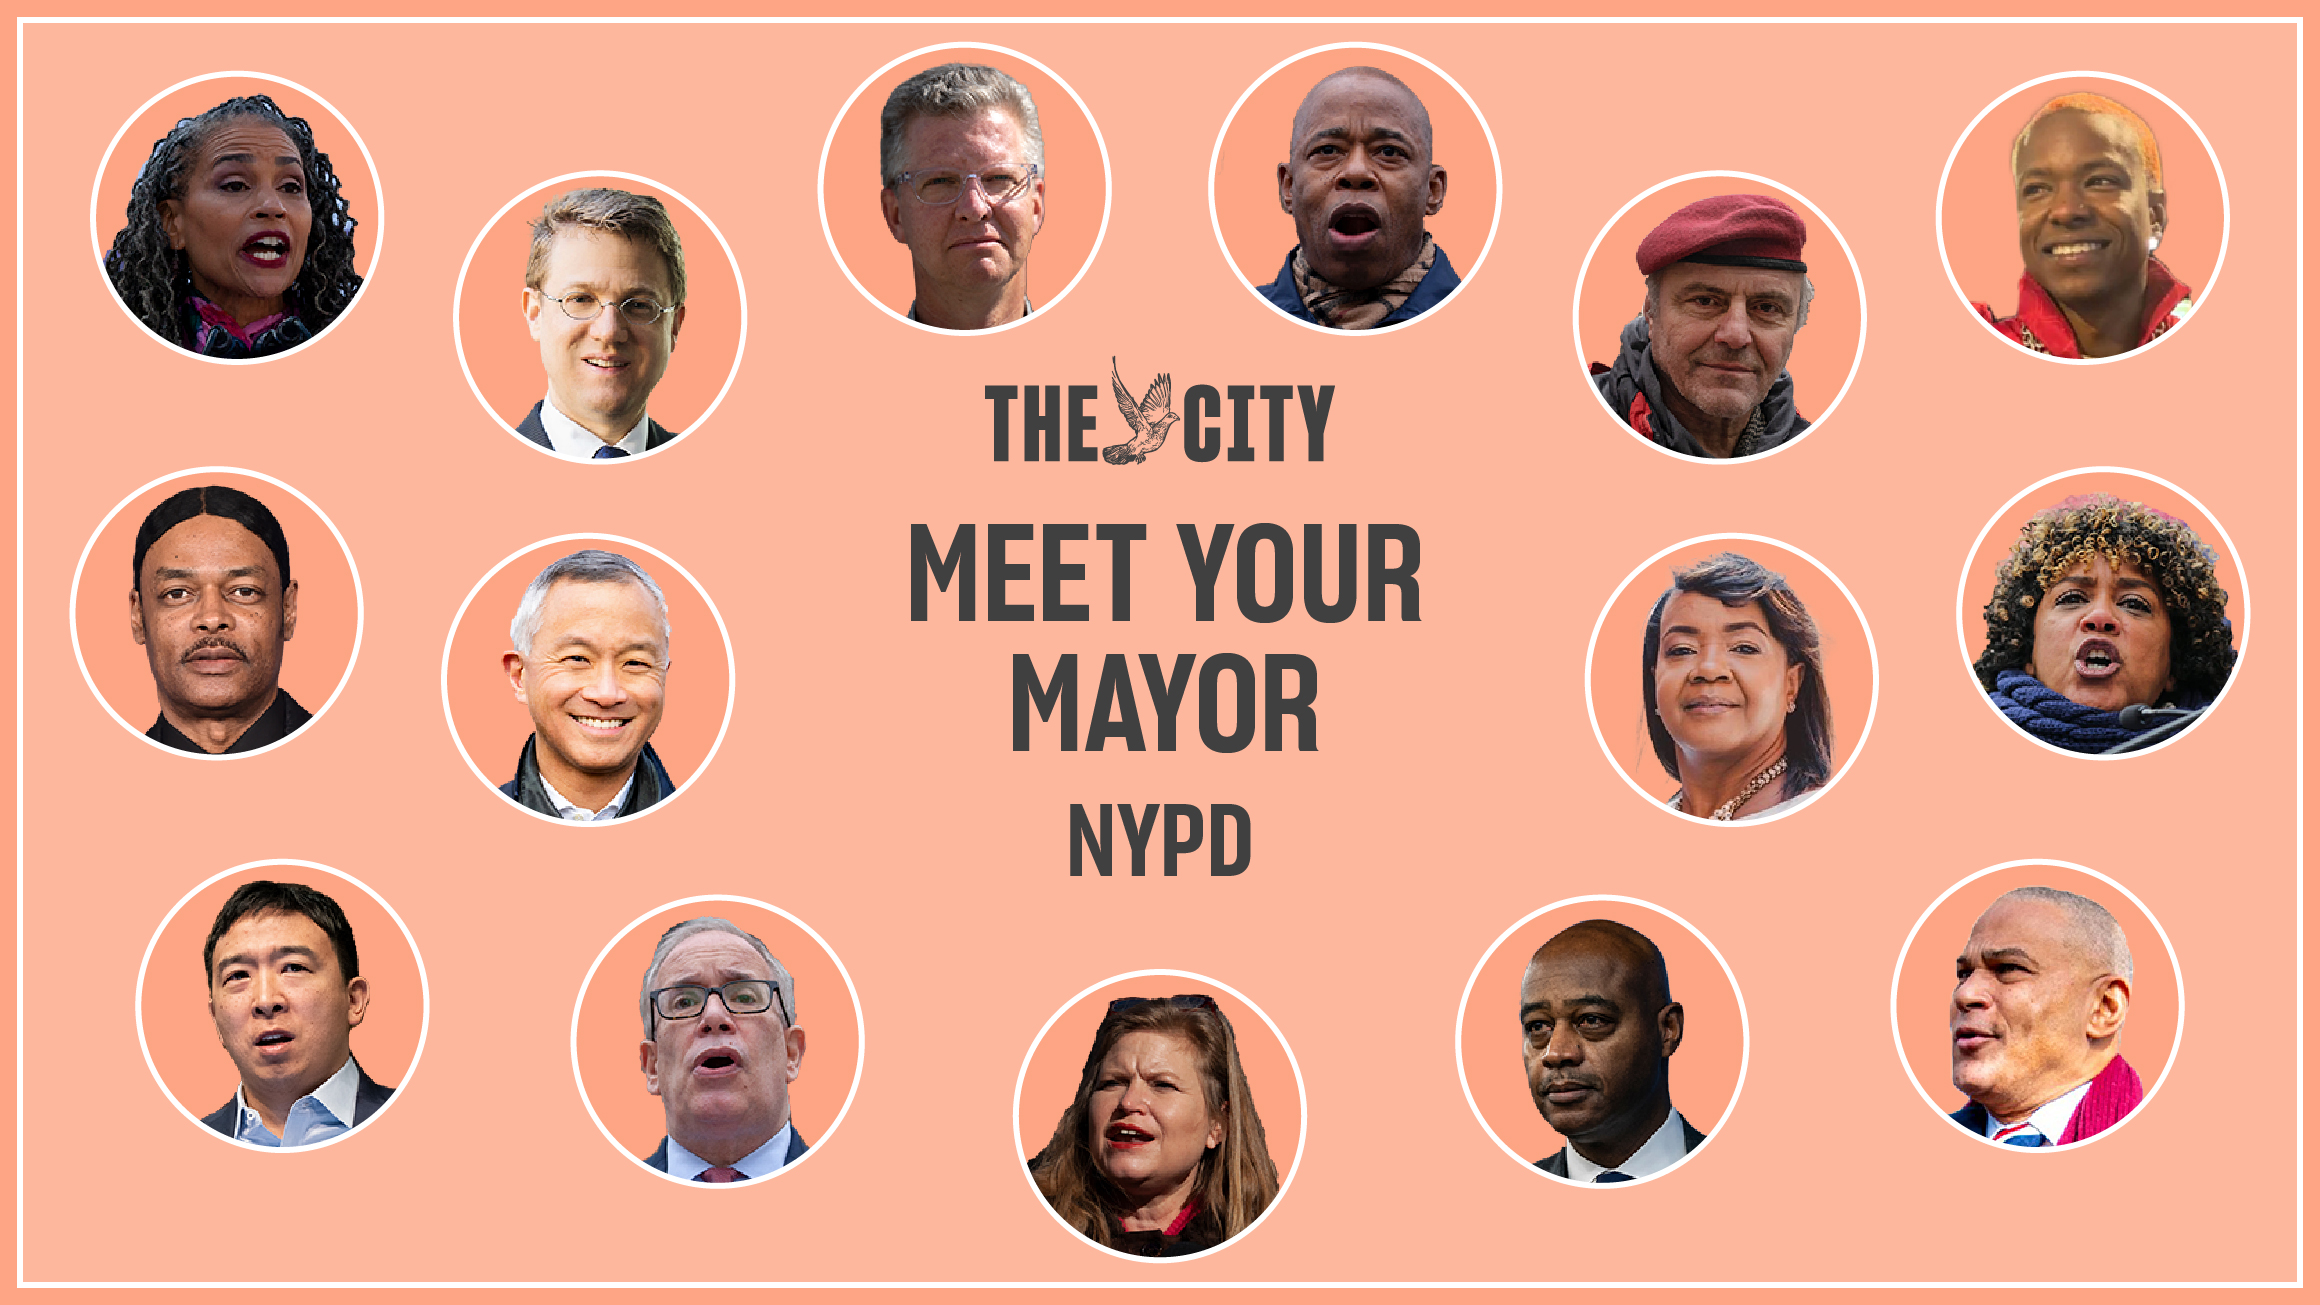 Meet Your Mayor NYPD